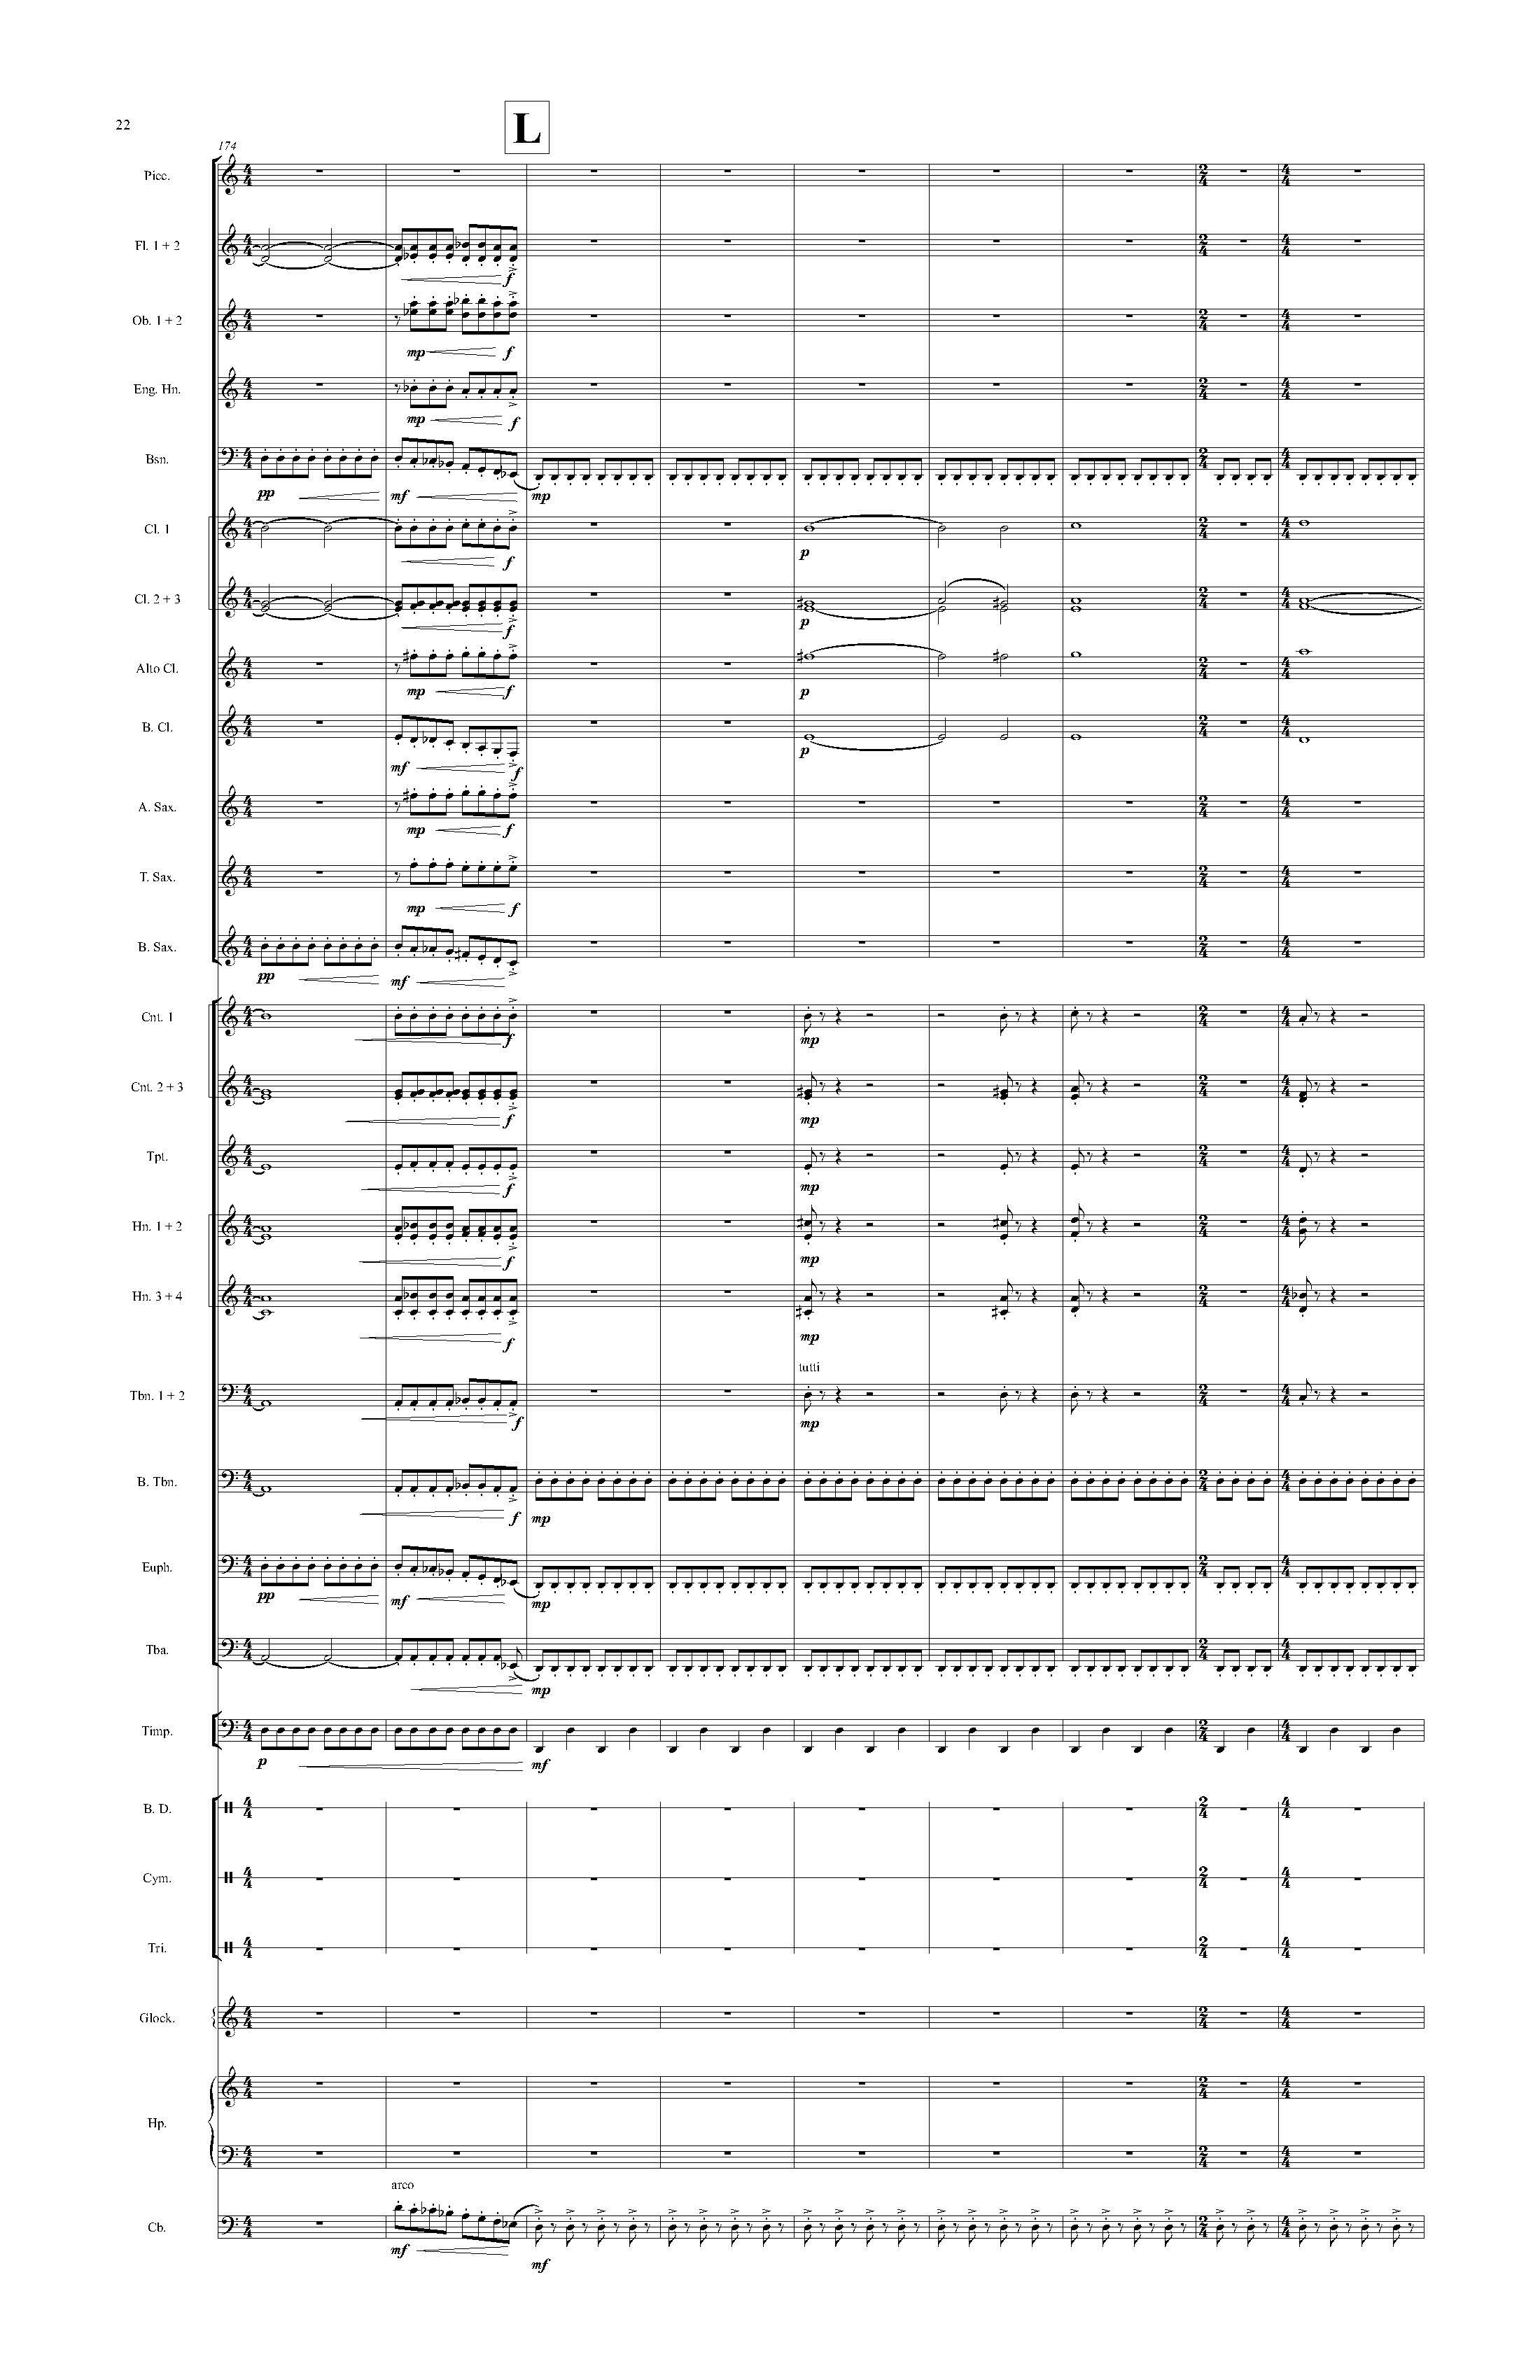 Psyche - Complete Score_Page_28.jpg